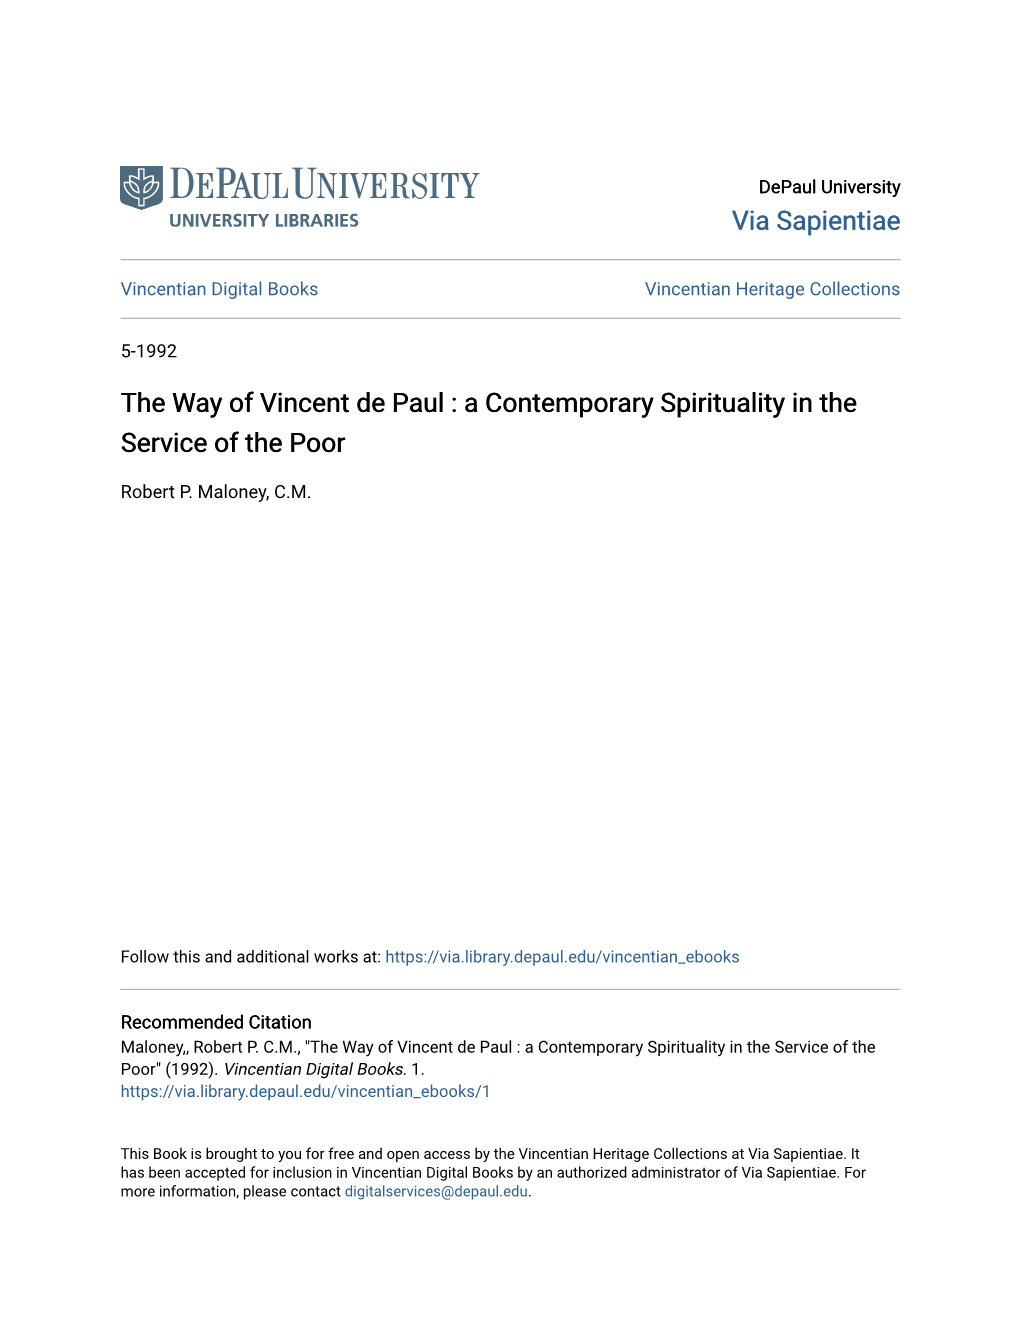 The Way of Vincent De Paul : a Contemporary Spirituality in the Service of the Poor